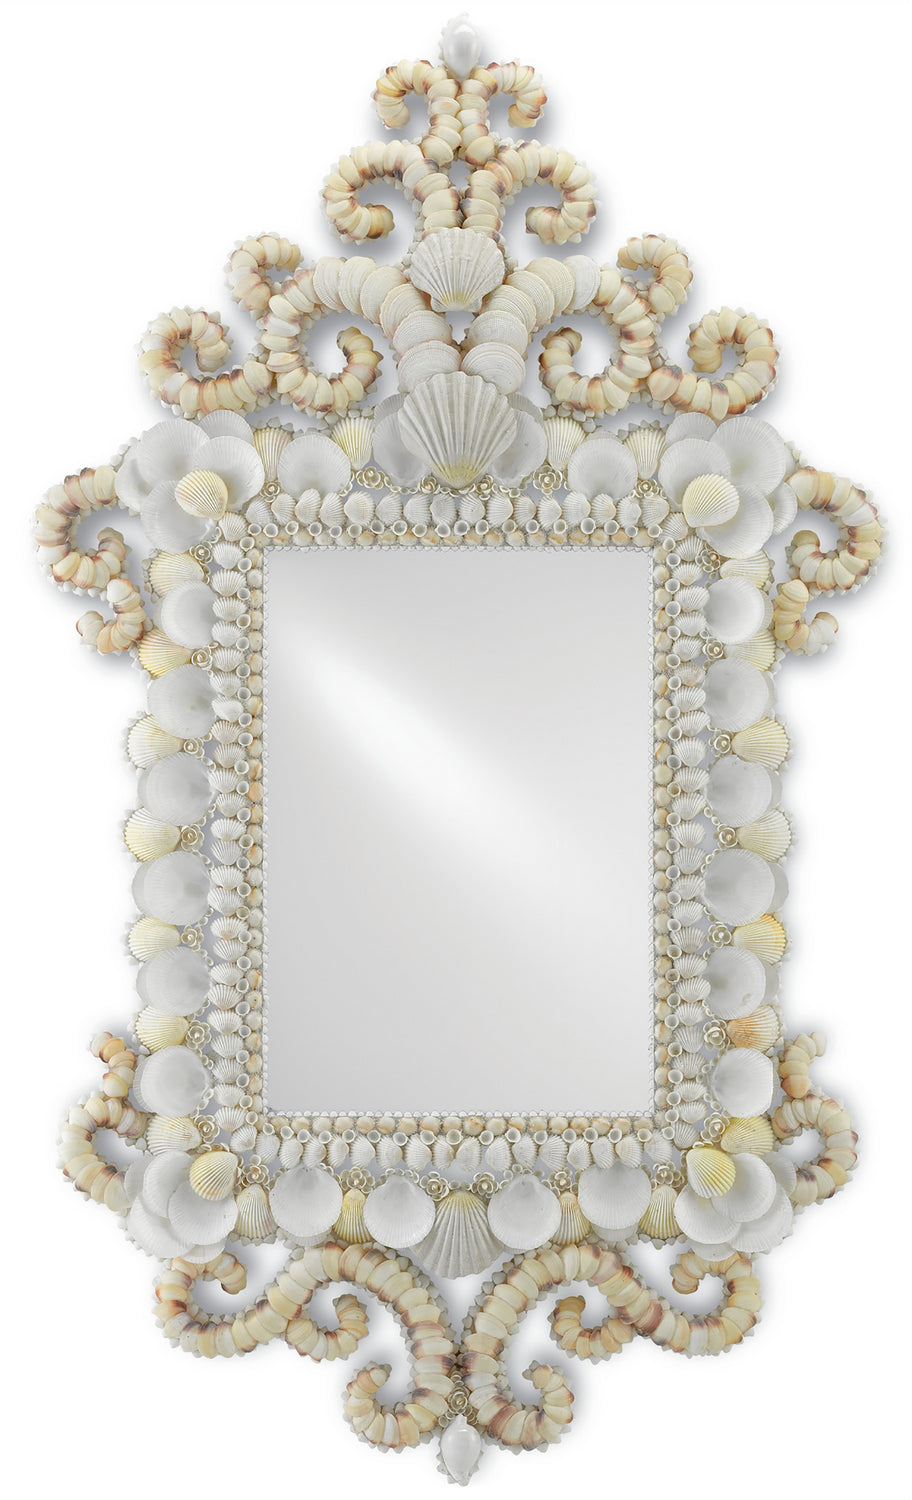 Mirror from the Cecilia collection in White/Natural/Mirror finish